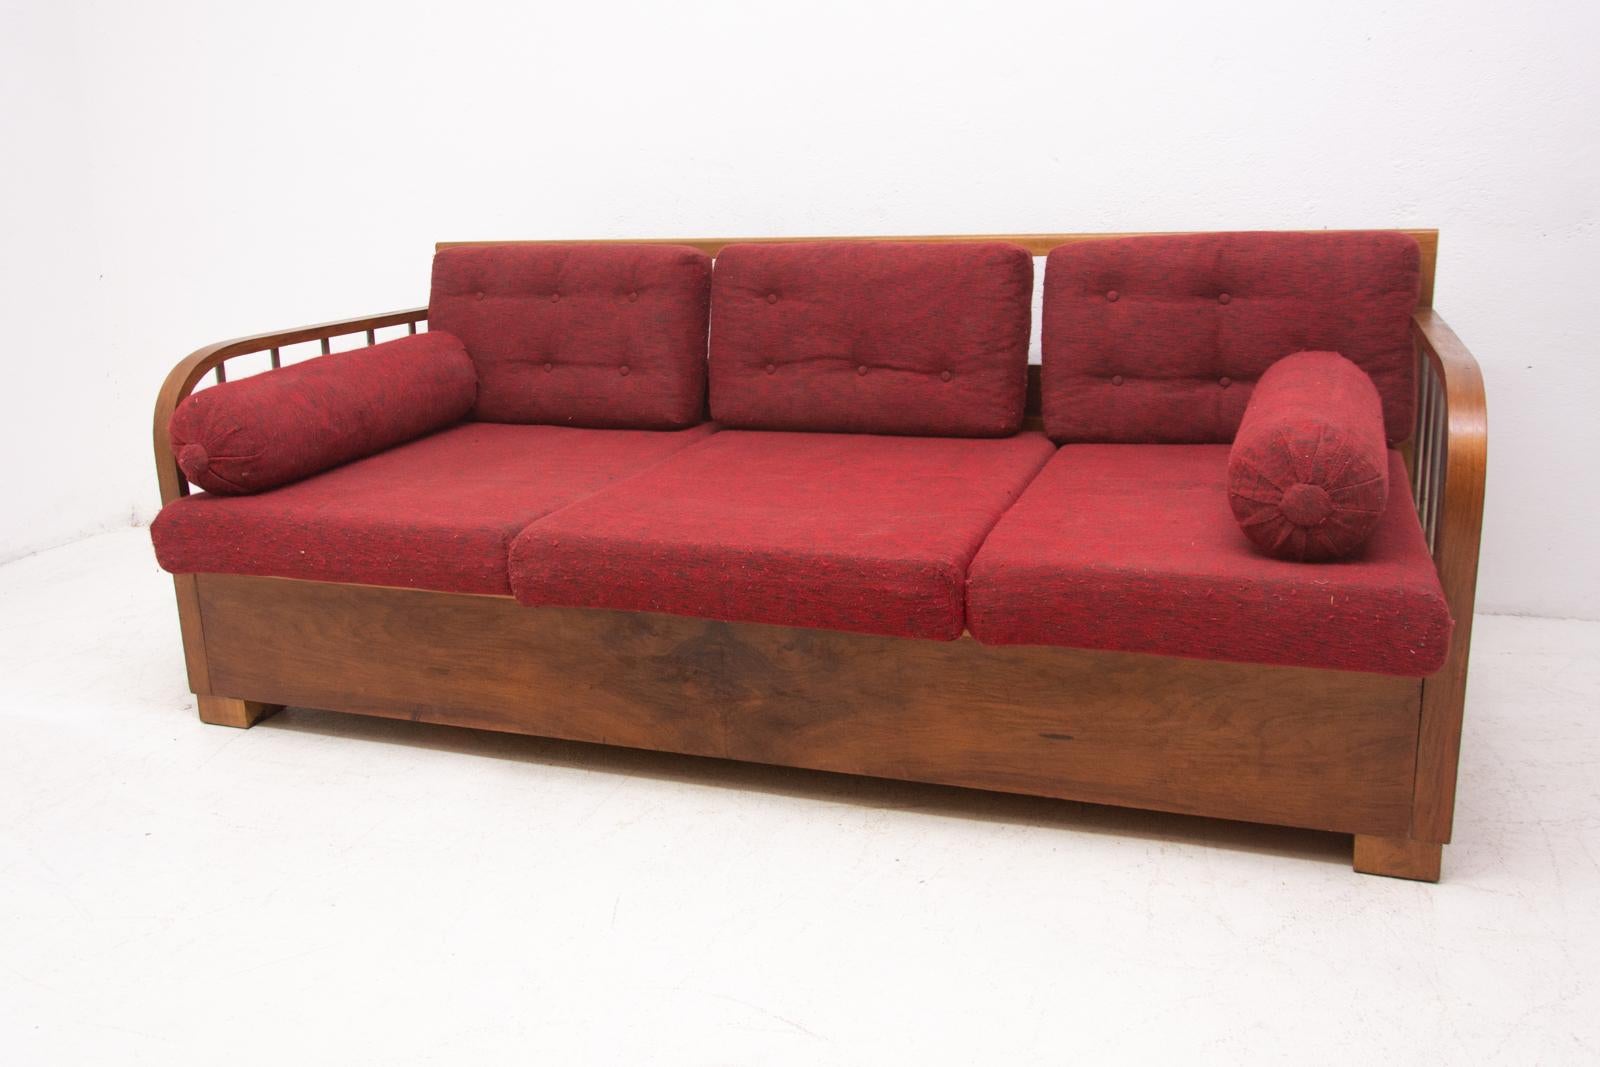 20th Century Cataloque Functionalist Sofa H-215 by Jindrich Halabala for UP Zavody, 1930s